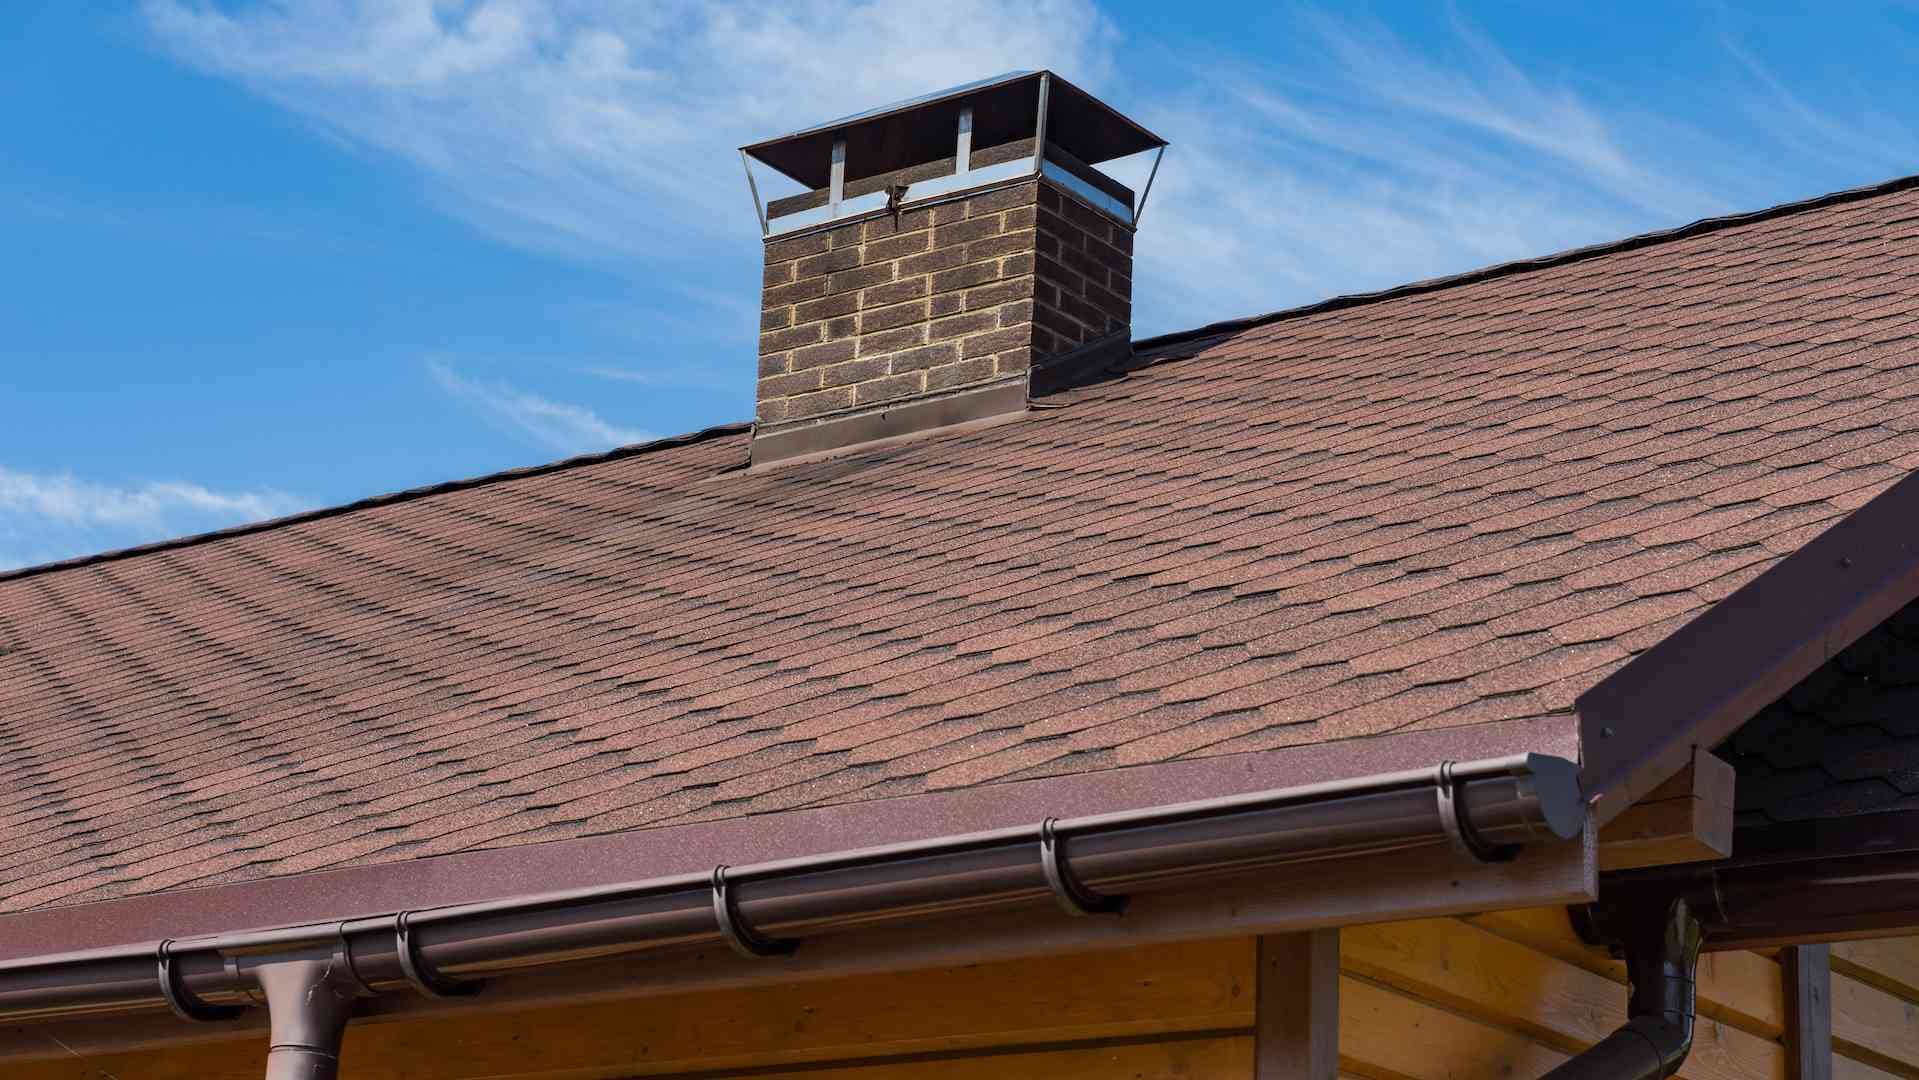 Image of a house roof with brown shingles and a brick chimney, installed by professional Roofing Contractors in Madison, NJ.